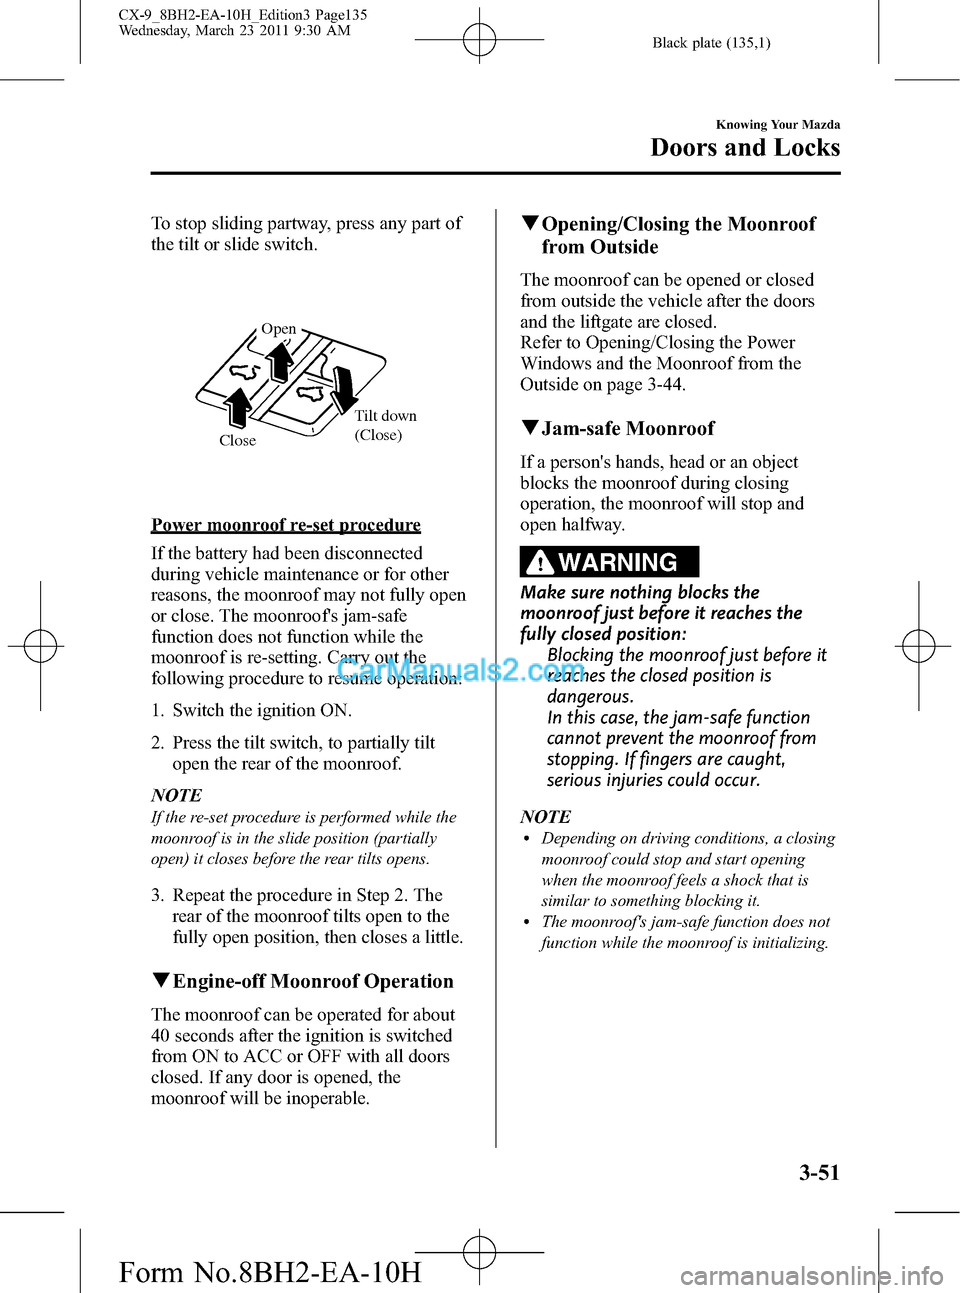 MAZDA MODEL CX-9 2011  Owners Manual (in English) Black plate (135,1)
To stop sliding partway, press any part of
the tilt or slide switch.
Close Tilt down 
(Close)
Open
Power moonroof re-set procedure
If the battery had been disconnected
during vehic